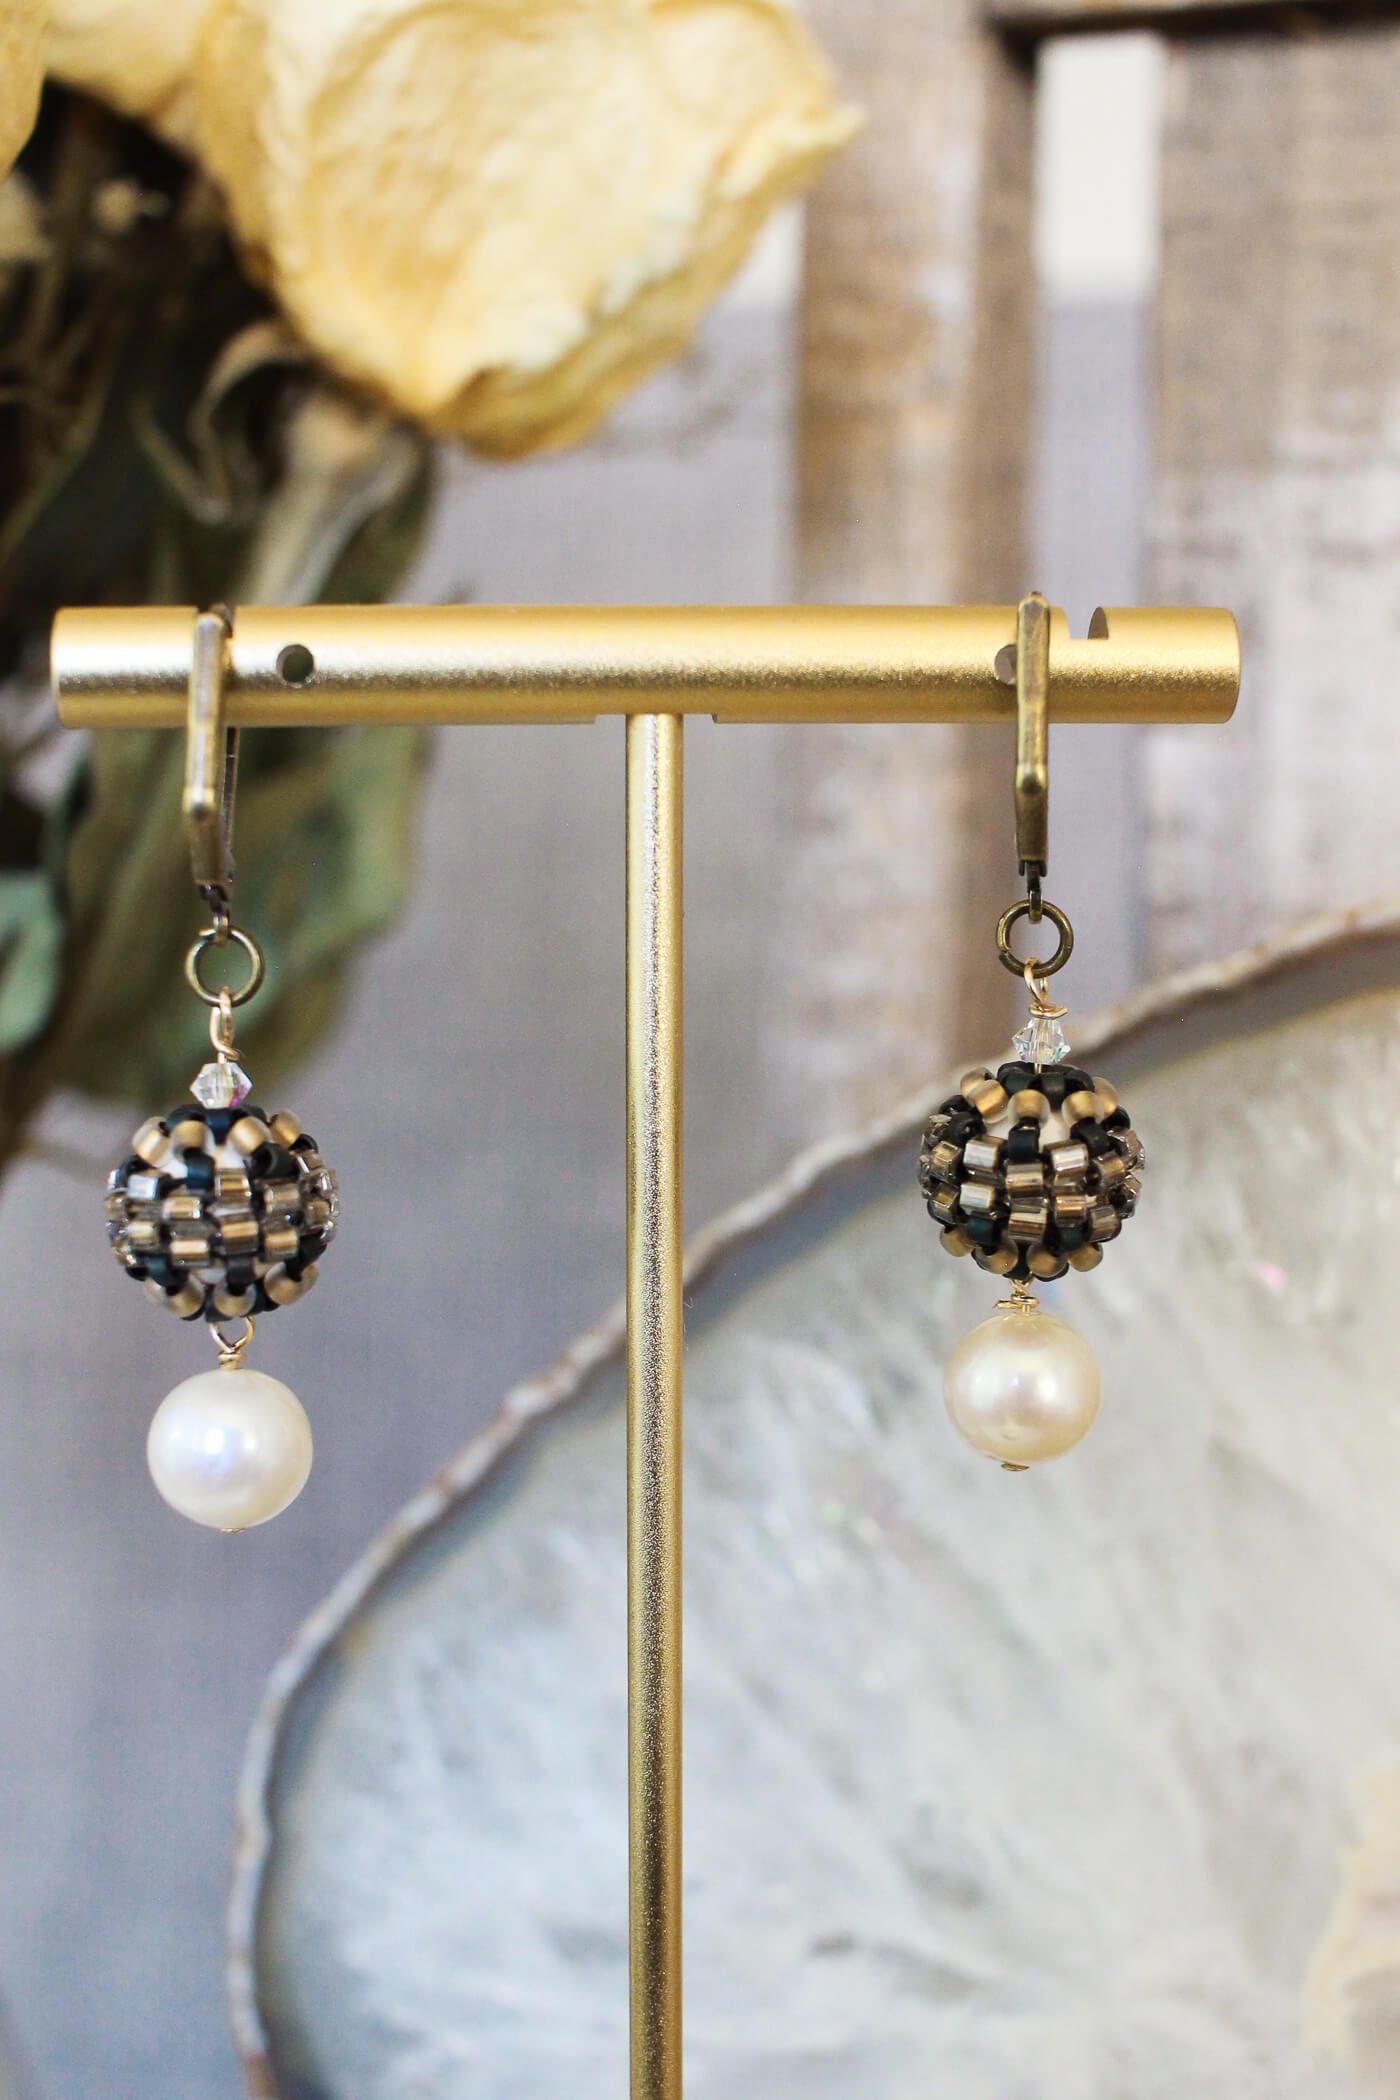 Pearl drop earrings designed with something old and something new for the vintage soul. #pearlearrings #pearldropearrings #dangleanddropearrigs #dangleearrings